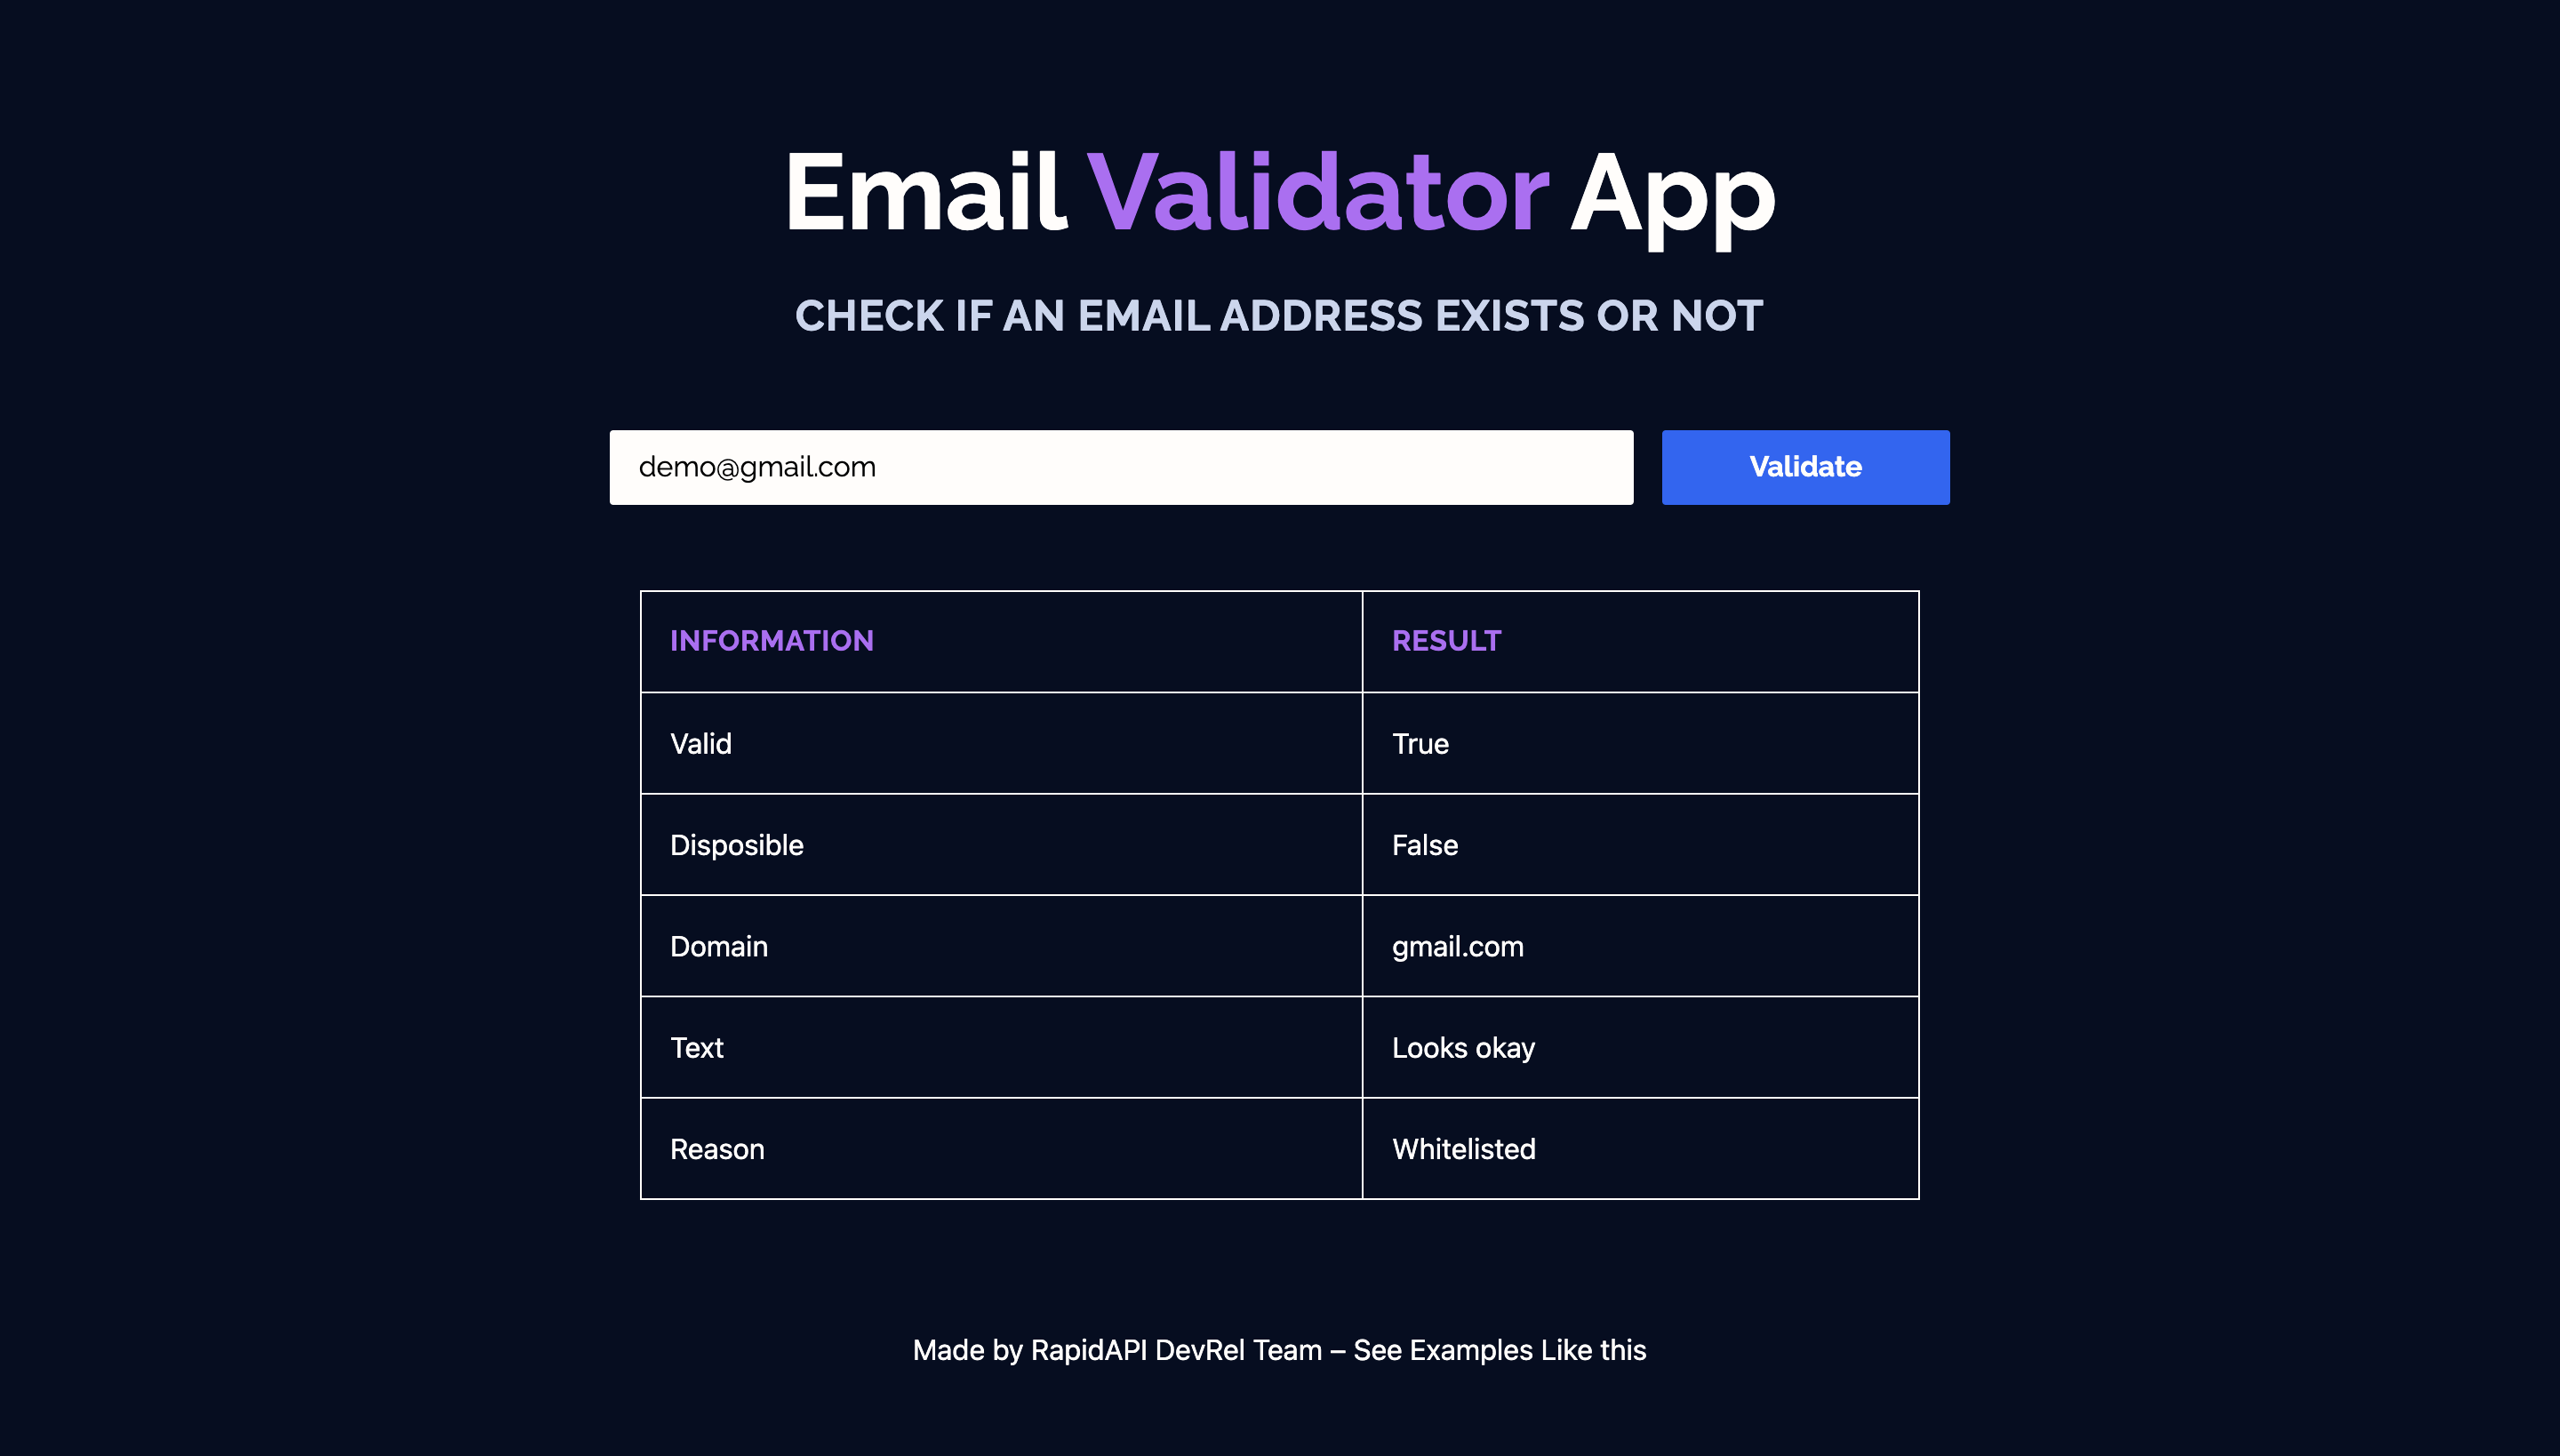 Email Validator App built with Email Check API